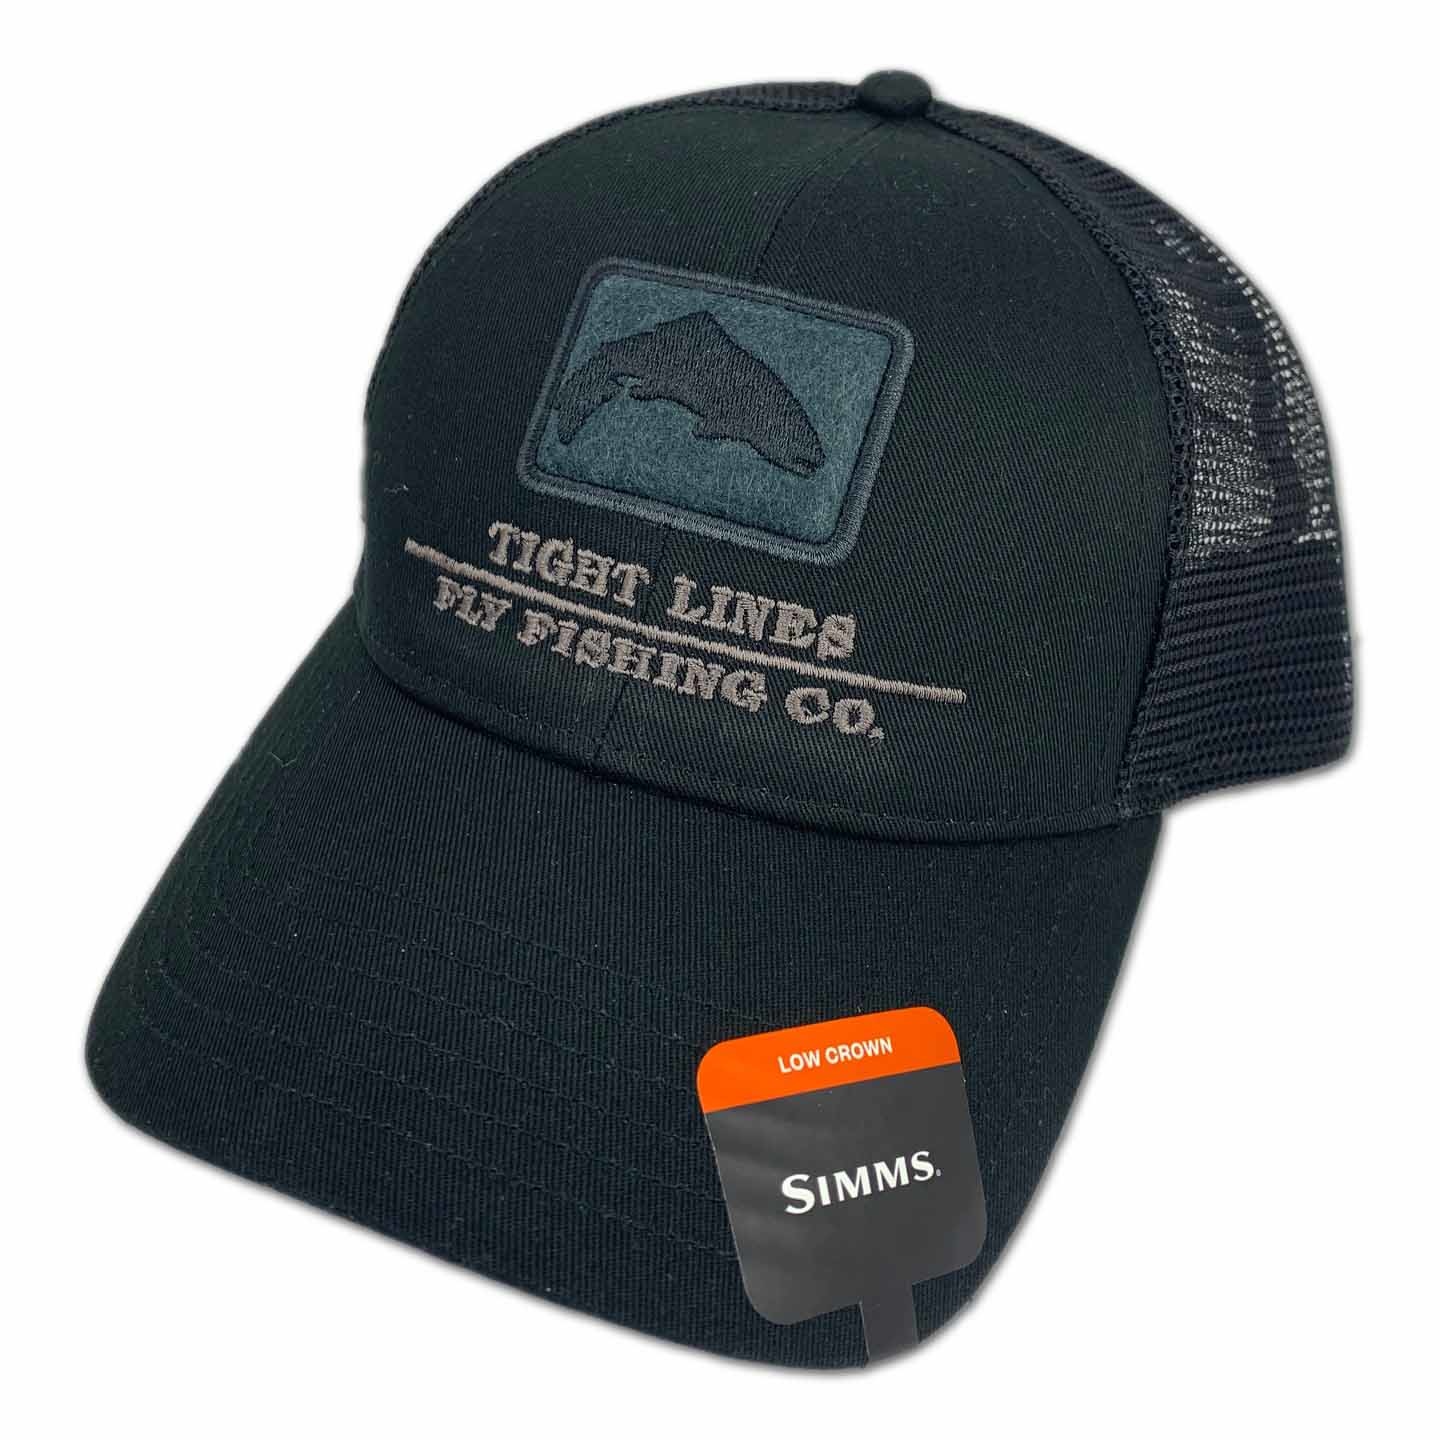 Simms Tightlines Logo Hat - Tight Lines Fly Fishing Co.